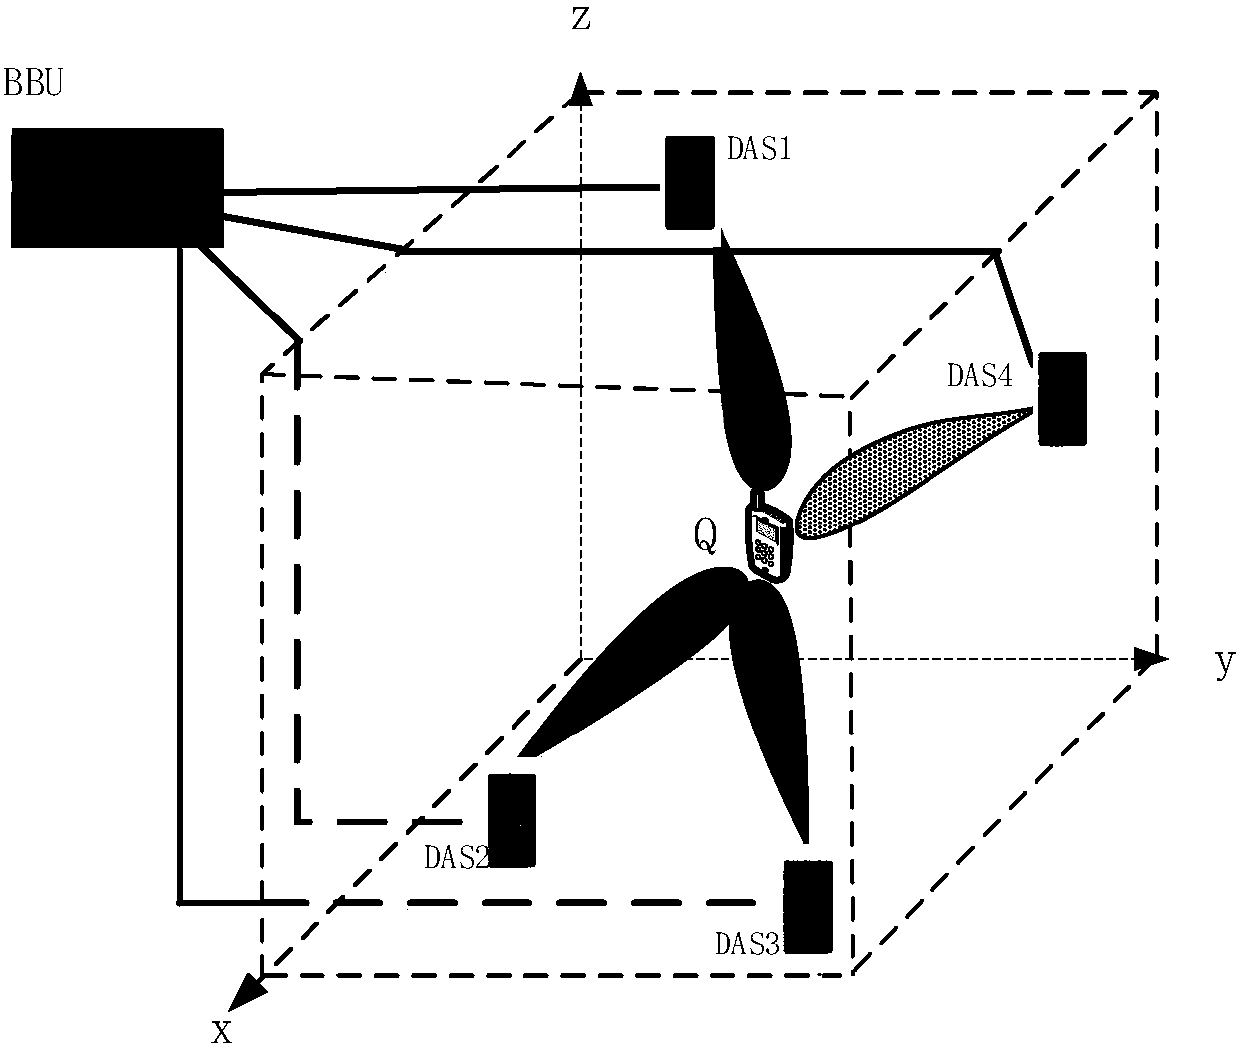 An indoor three-dimensional positioning method based on distributed antennas